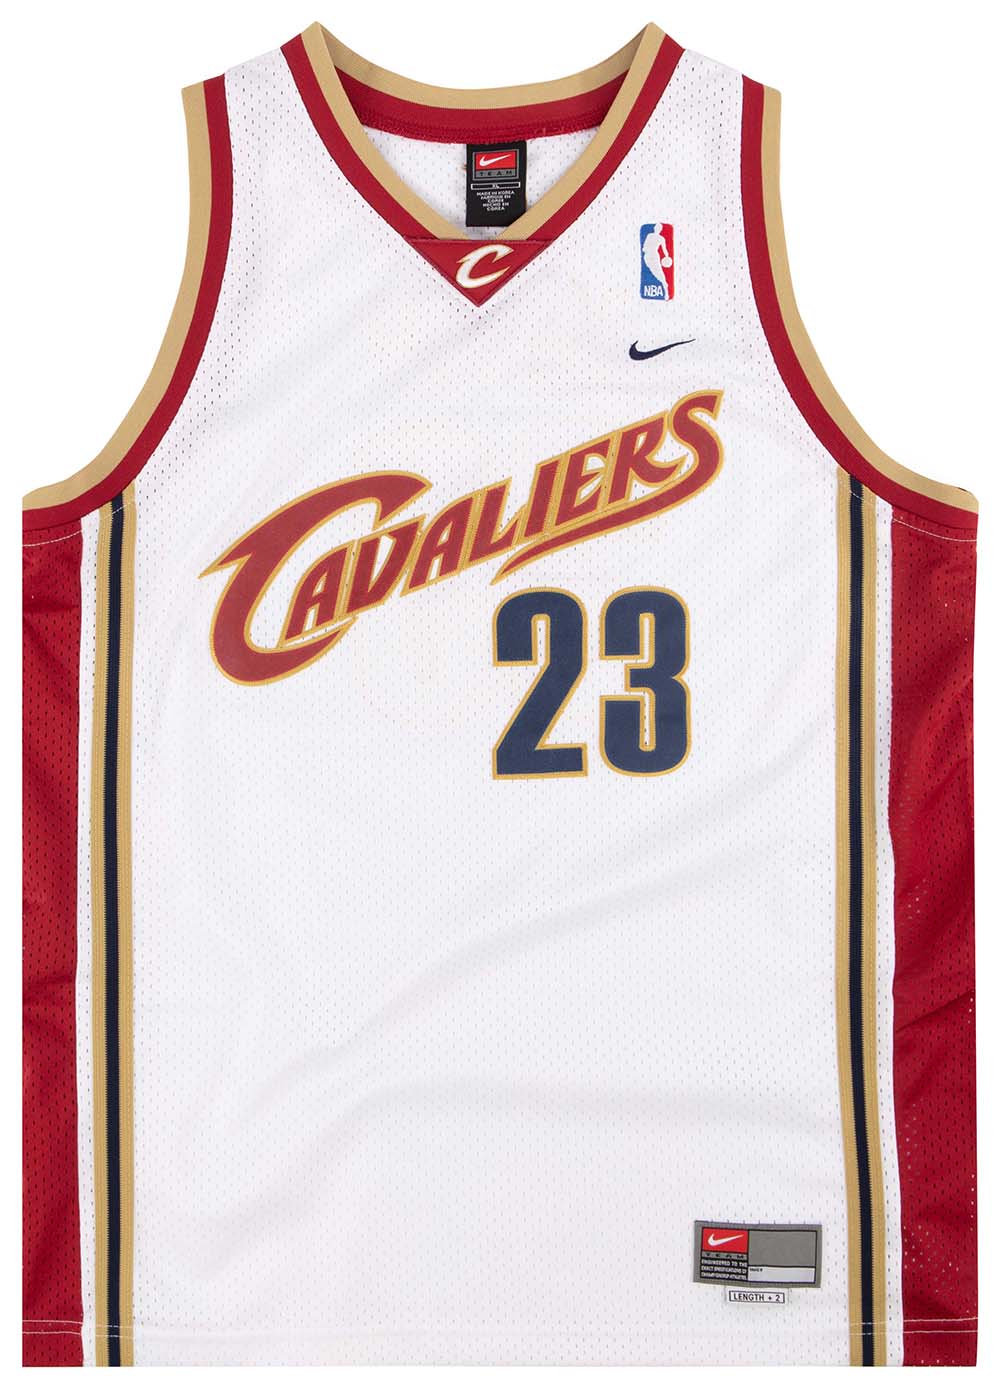 2003-04 CLEVELAND CAVALIERS WAGNER #2 NIKE SWINGMAN JERSEY (HOME) L -  Classic American Sports